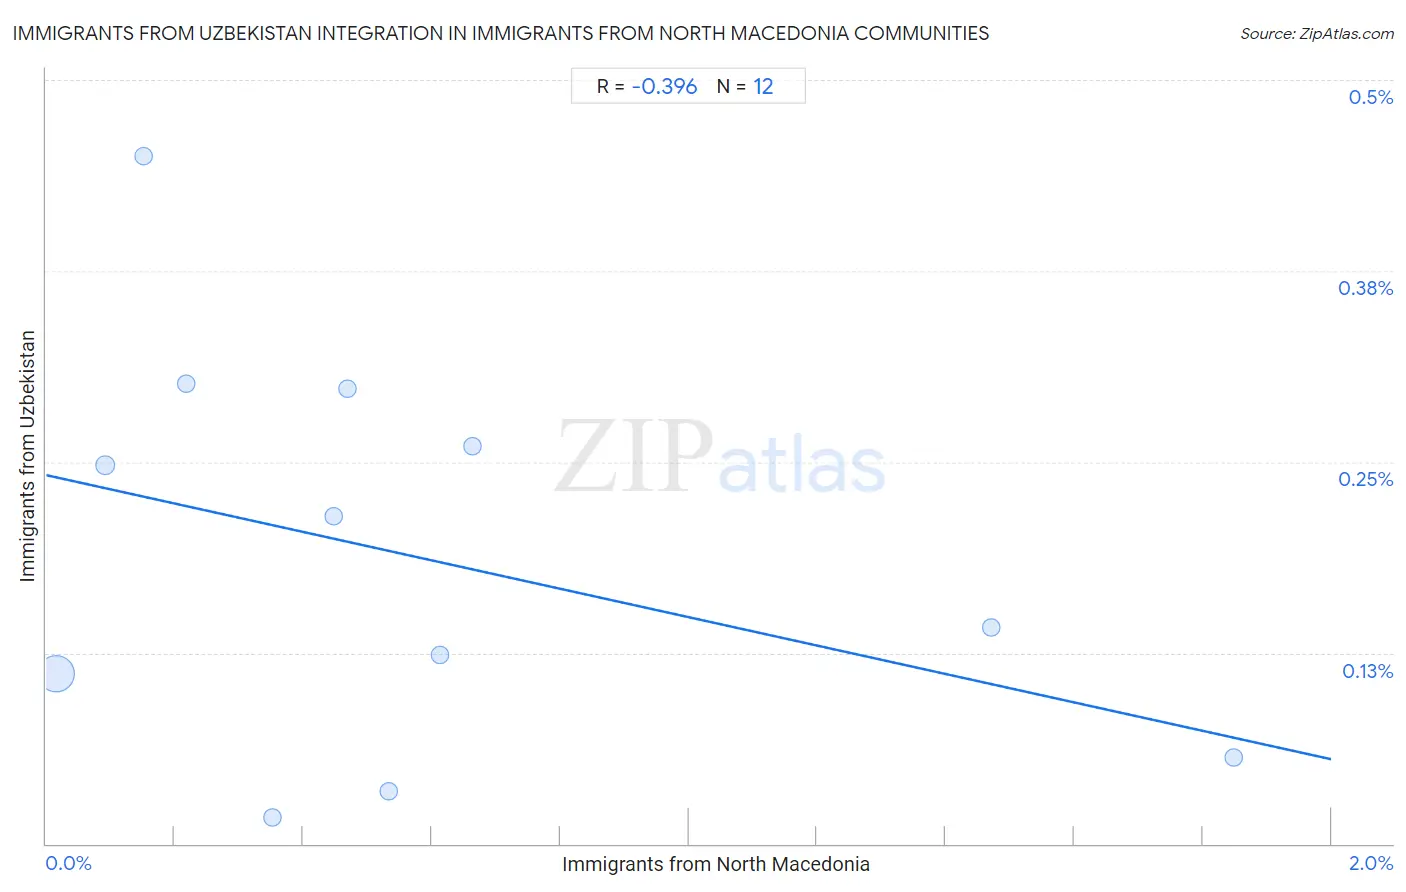 Immigrants from North Macedonia Integration in Immigrants from Uzbekistan Communities